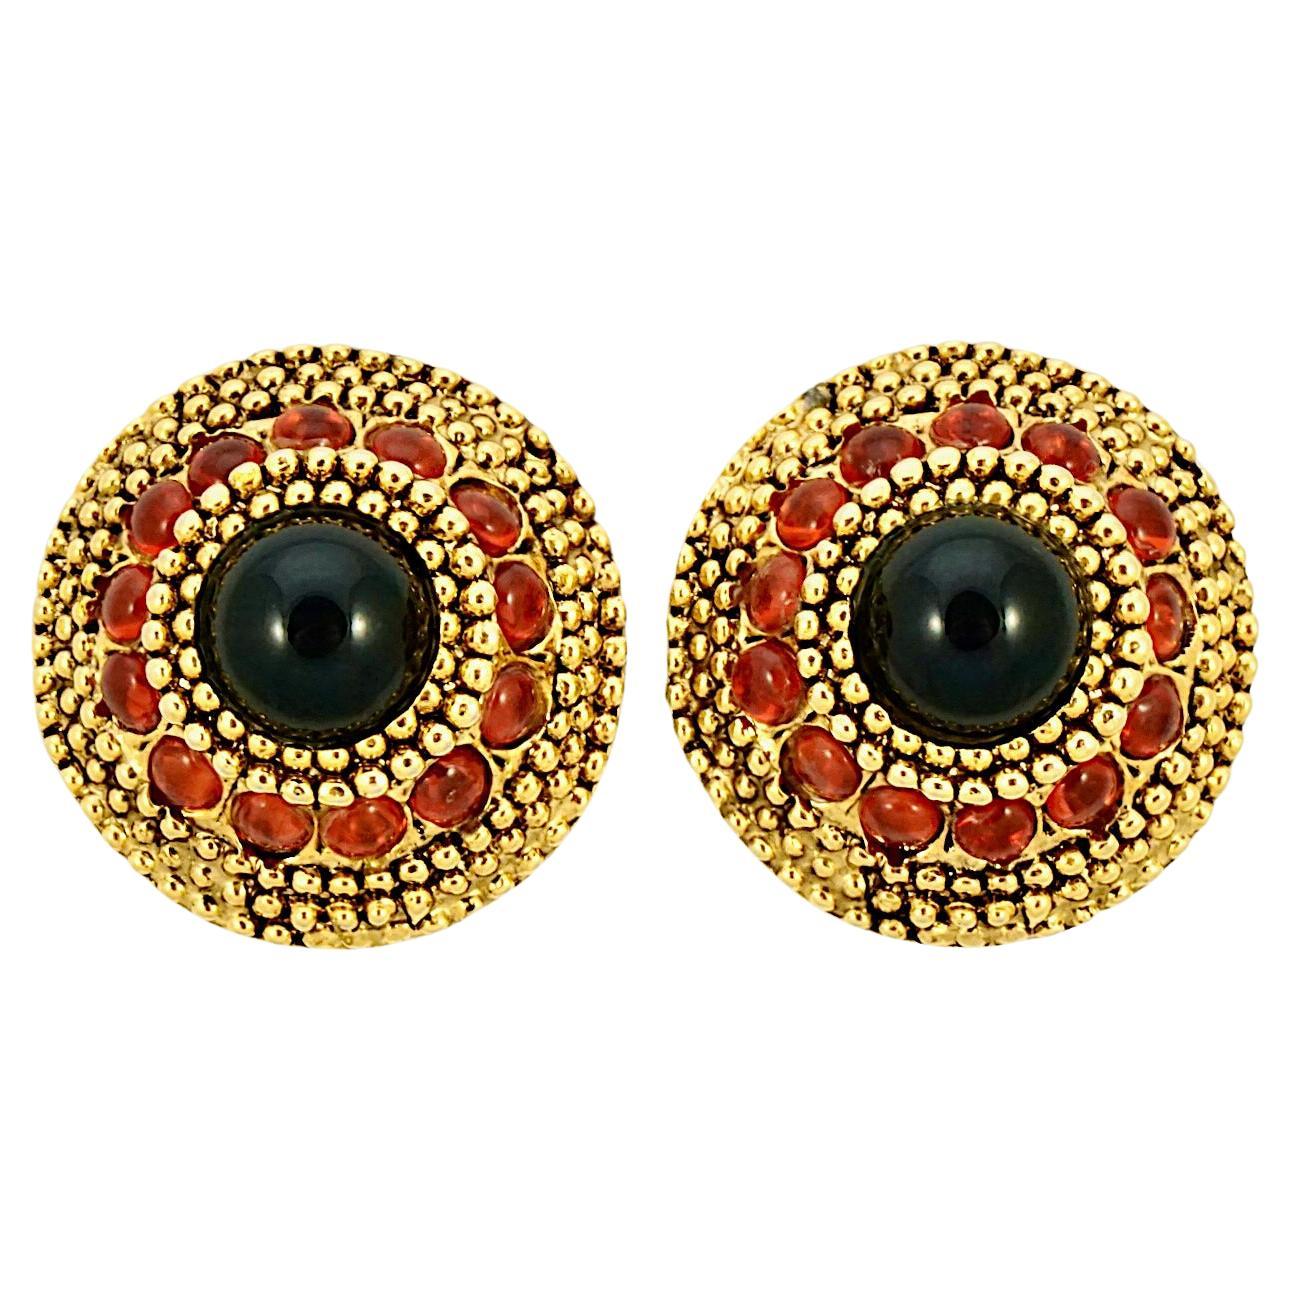 Gem-Craft Gold Plated Clip On Earrings with Black and Burnt Orange Glass Stones For Sale